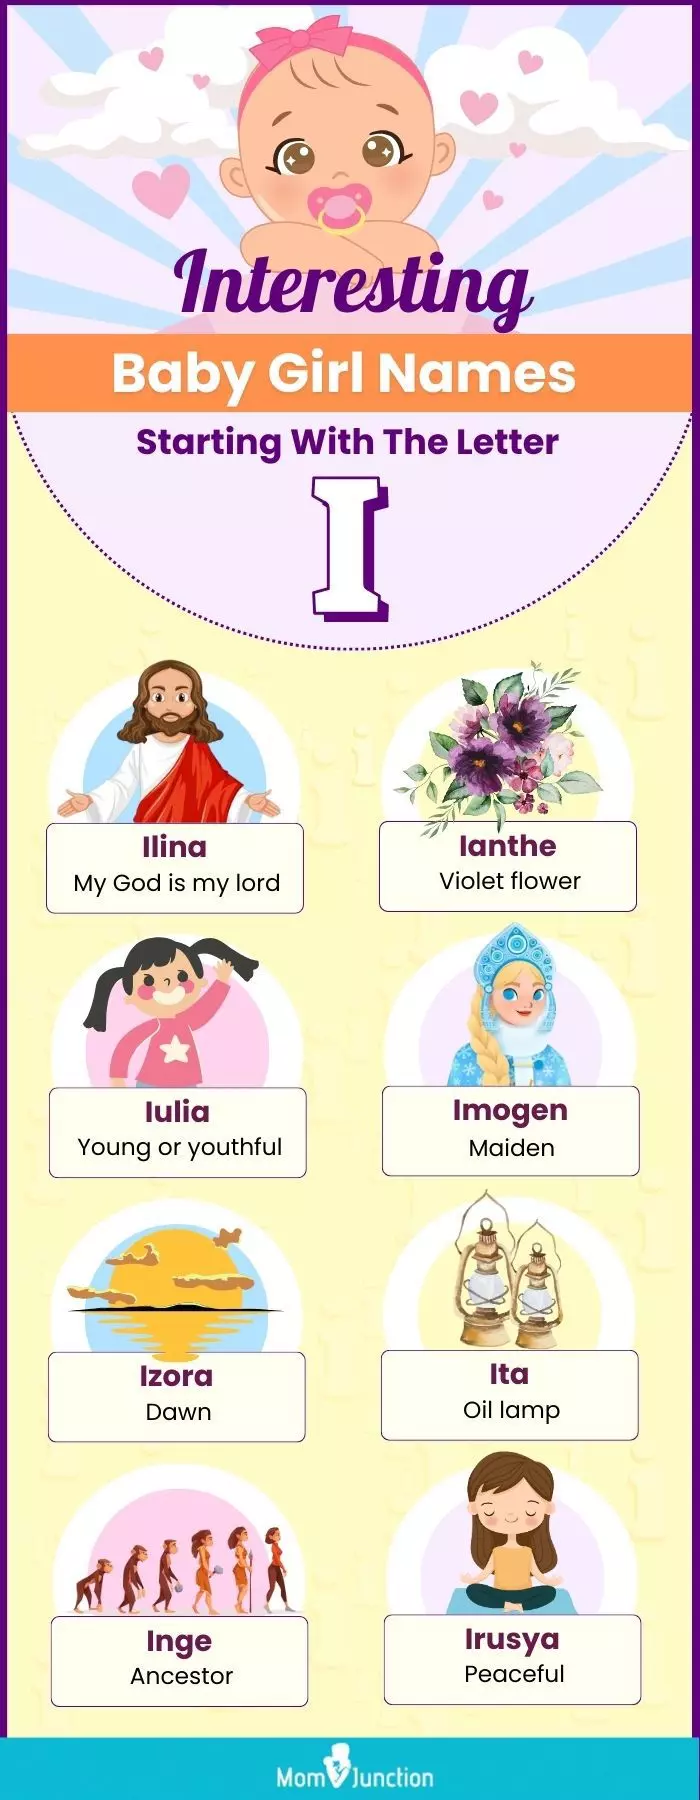 intersting baby girl names starting with the letter i (infographic)